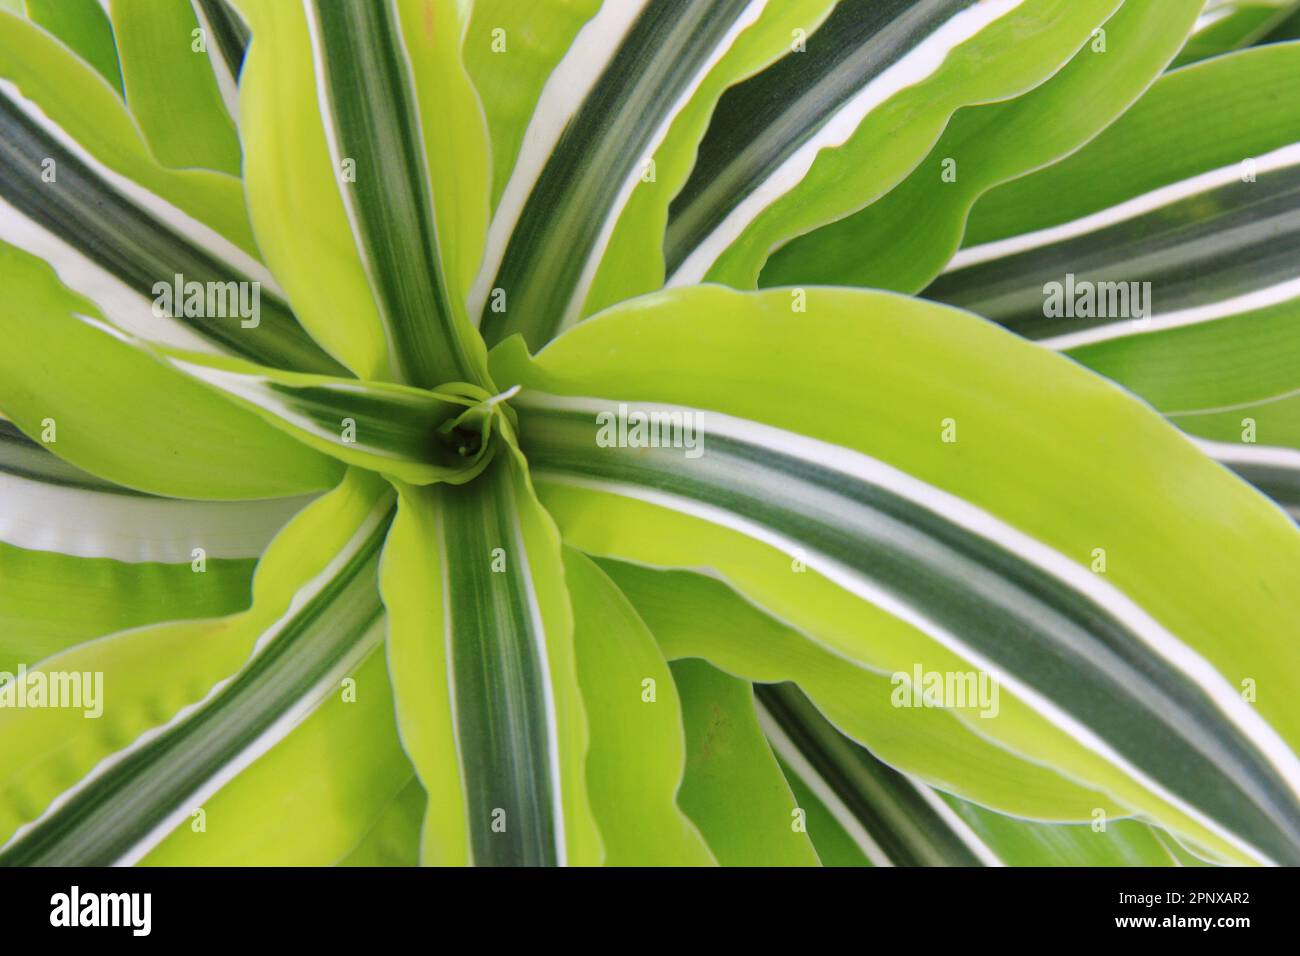 dracaena plant as very nice green natural background Stock Photo